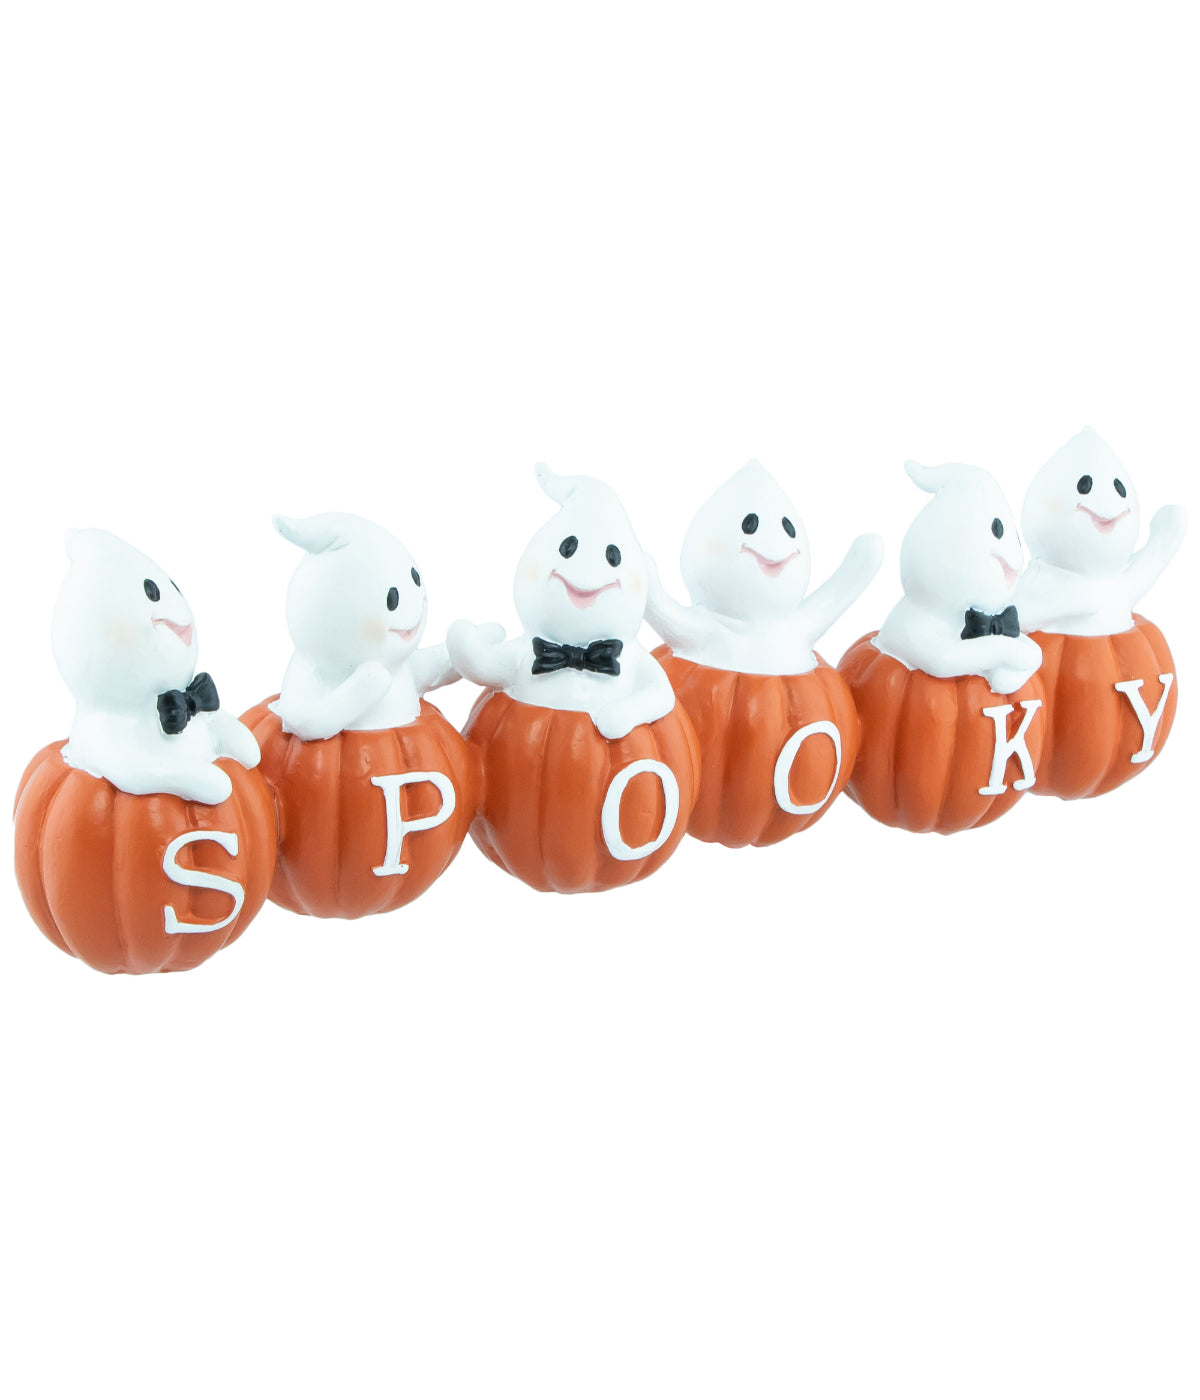 Ghosts and Pumpkins "Spooky" Halloween Decoration